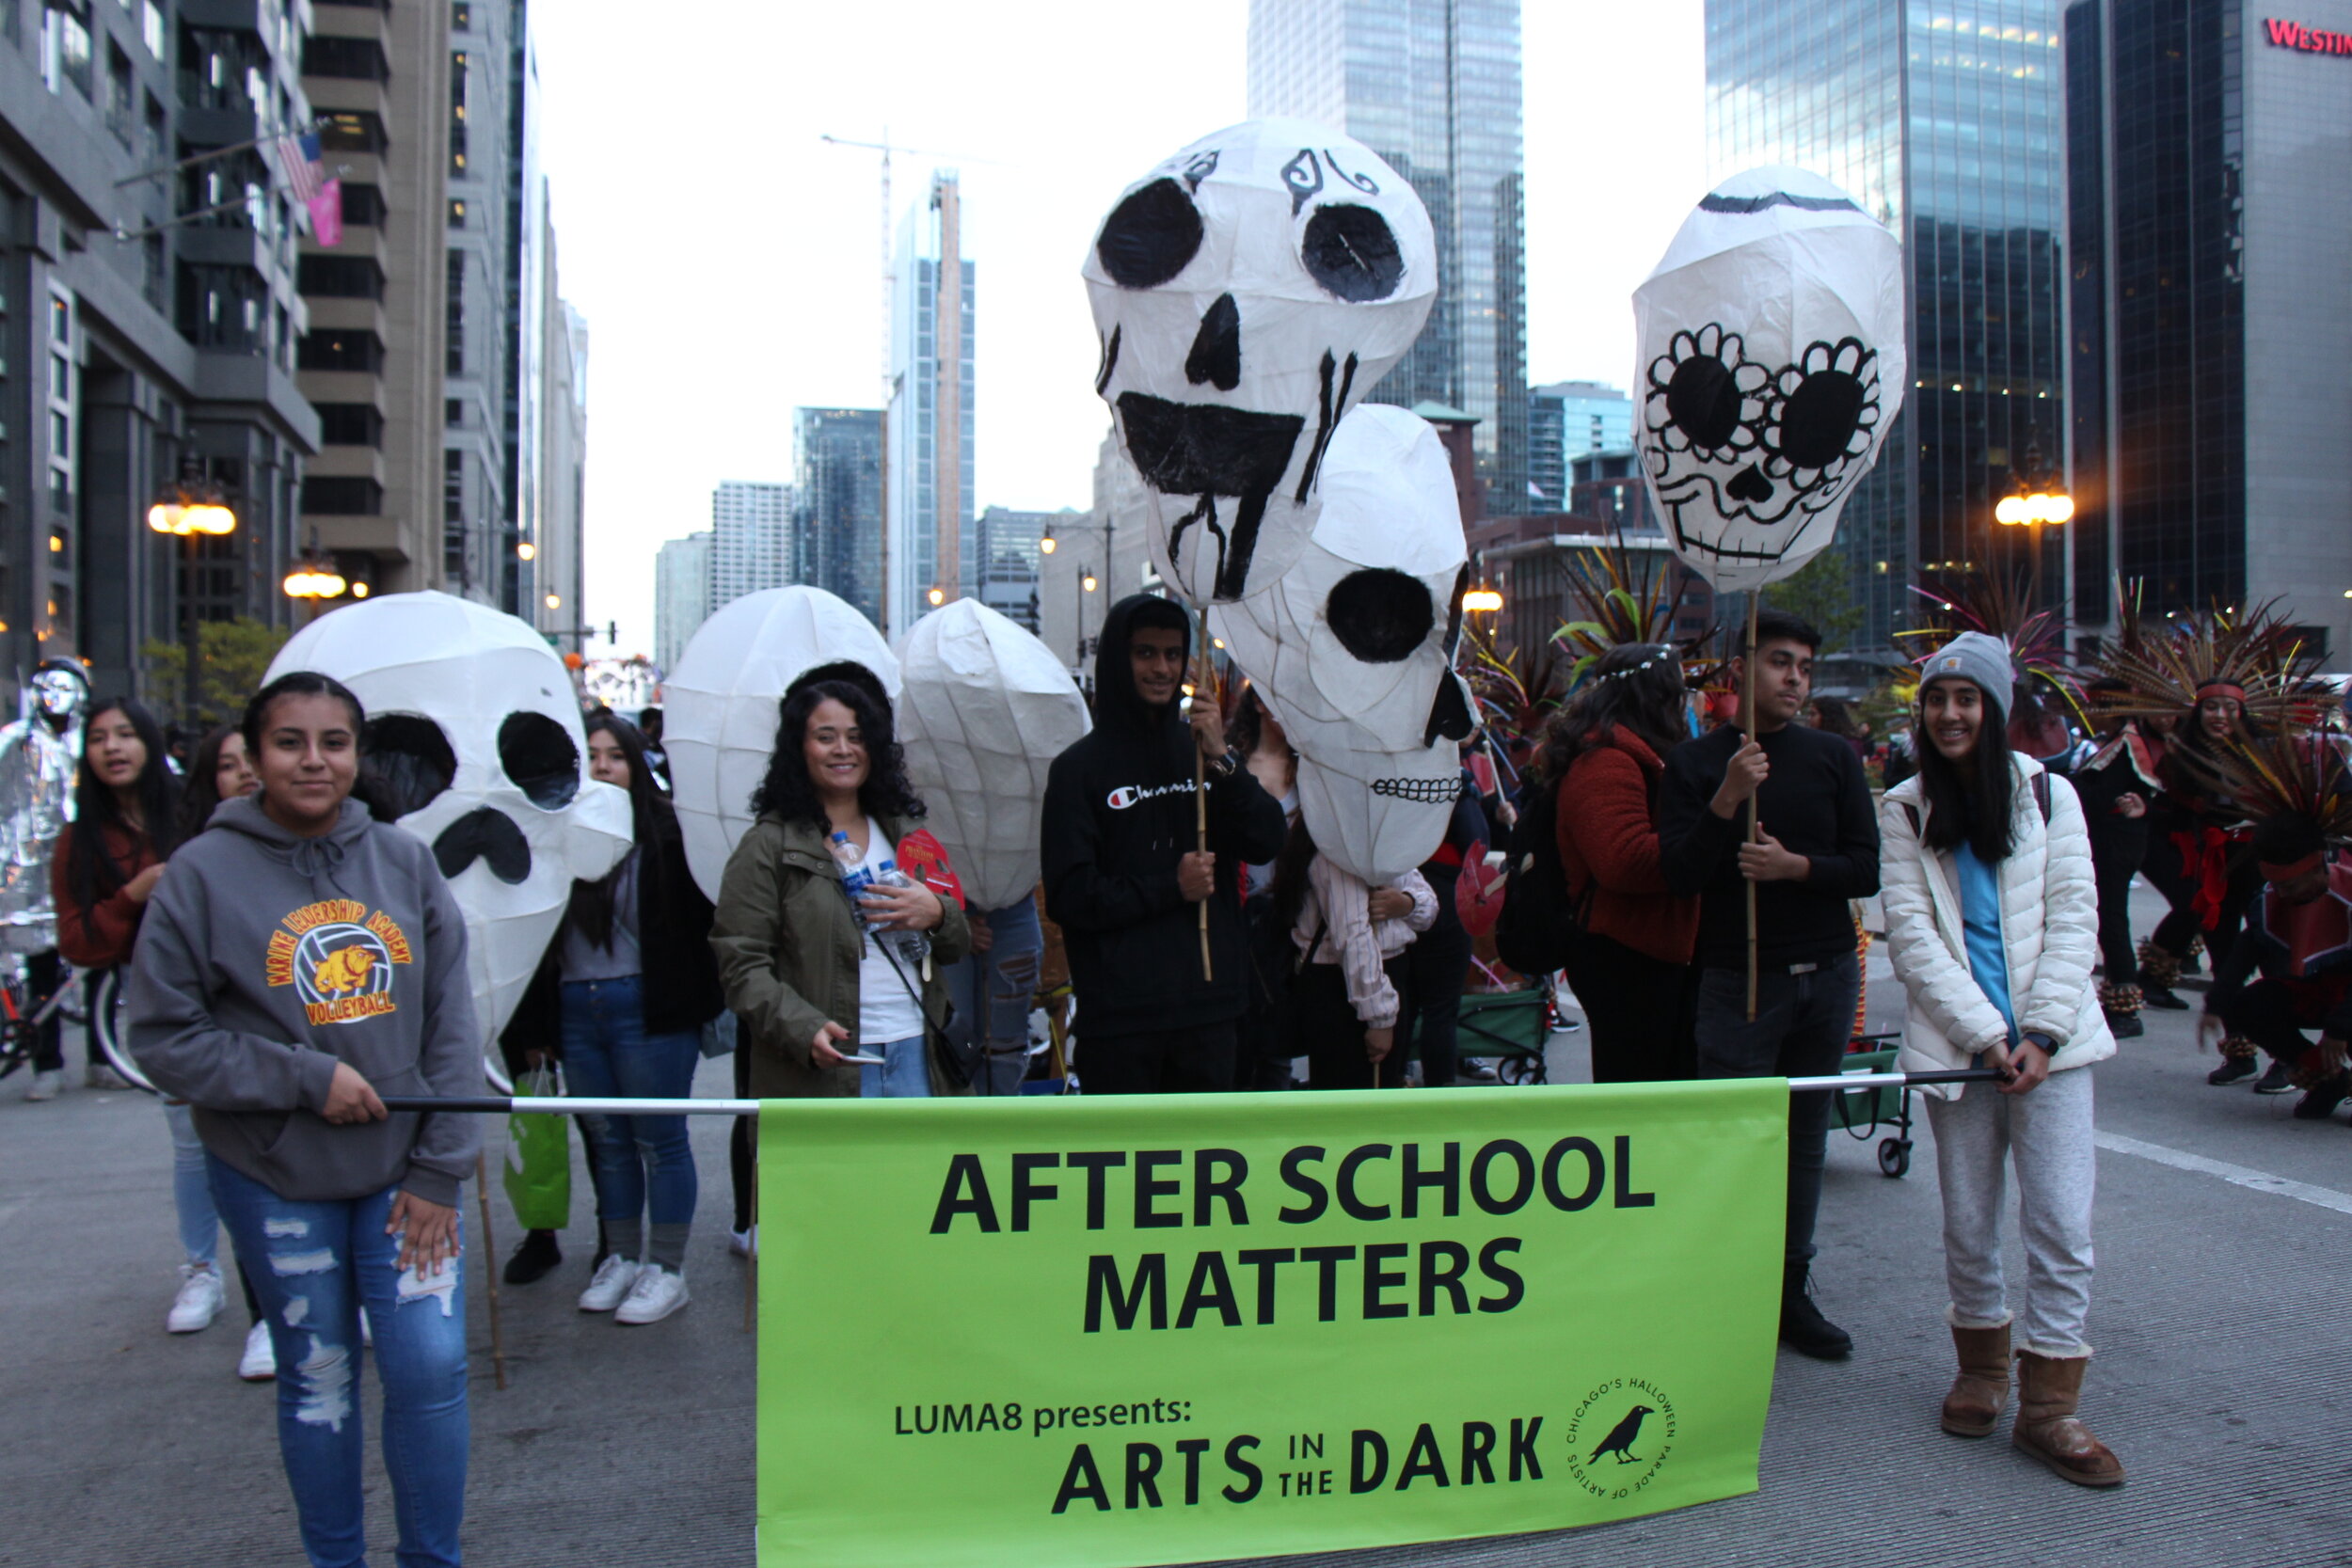 After School Matters getting ready for their third year of the Art in the Dark parade